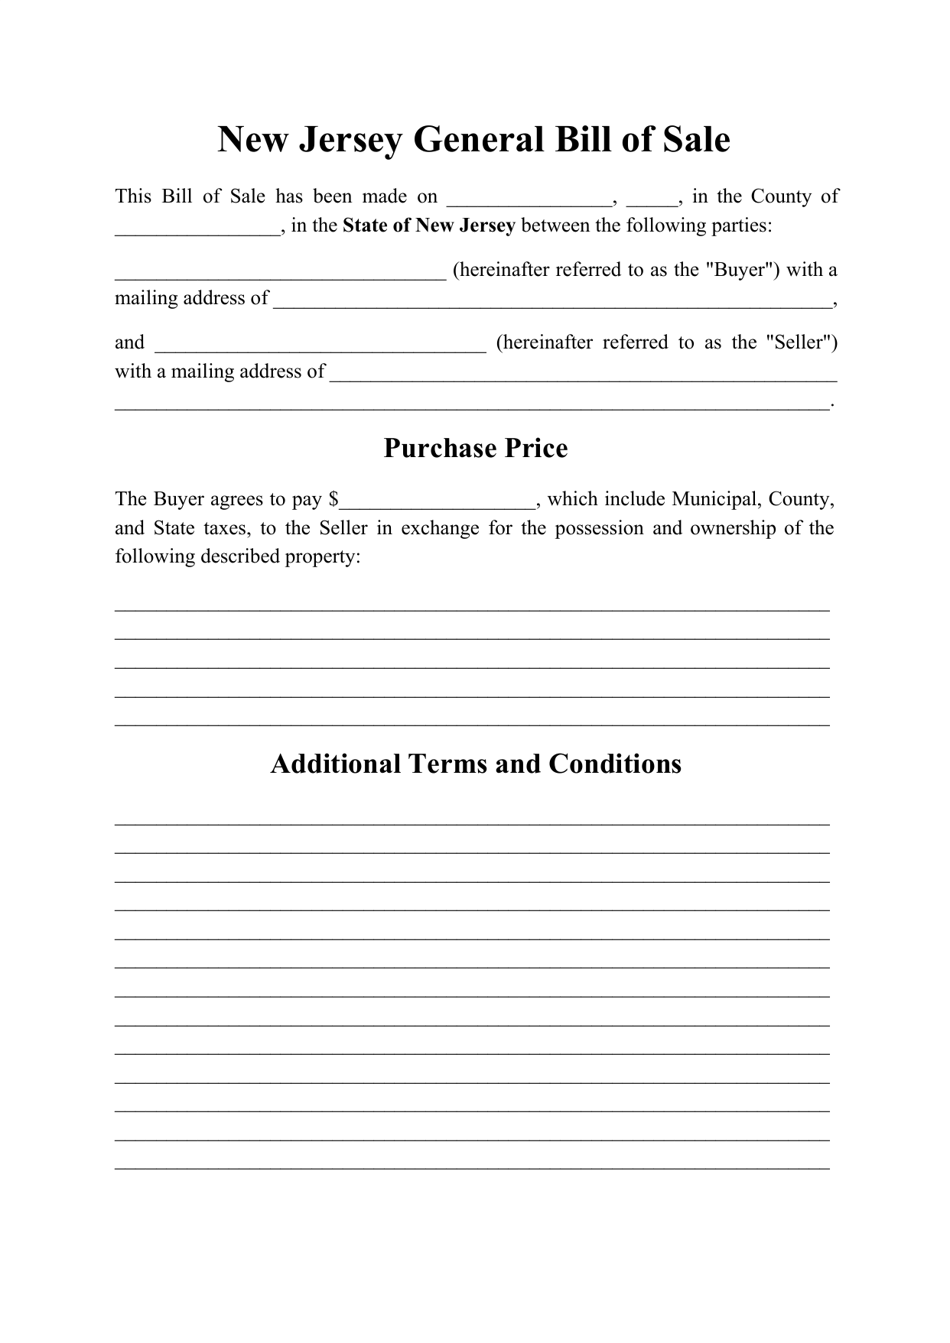 Generic Bill of Sale Form - New Jersey, Page 1